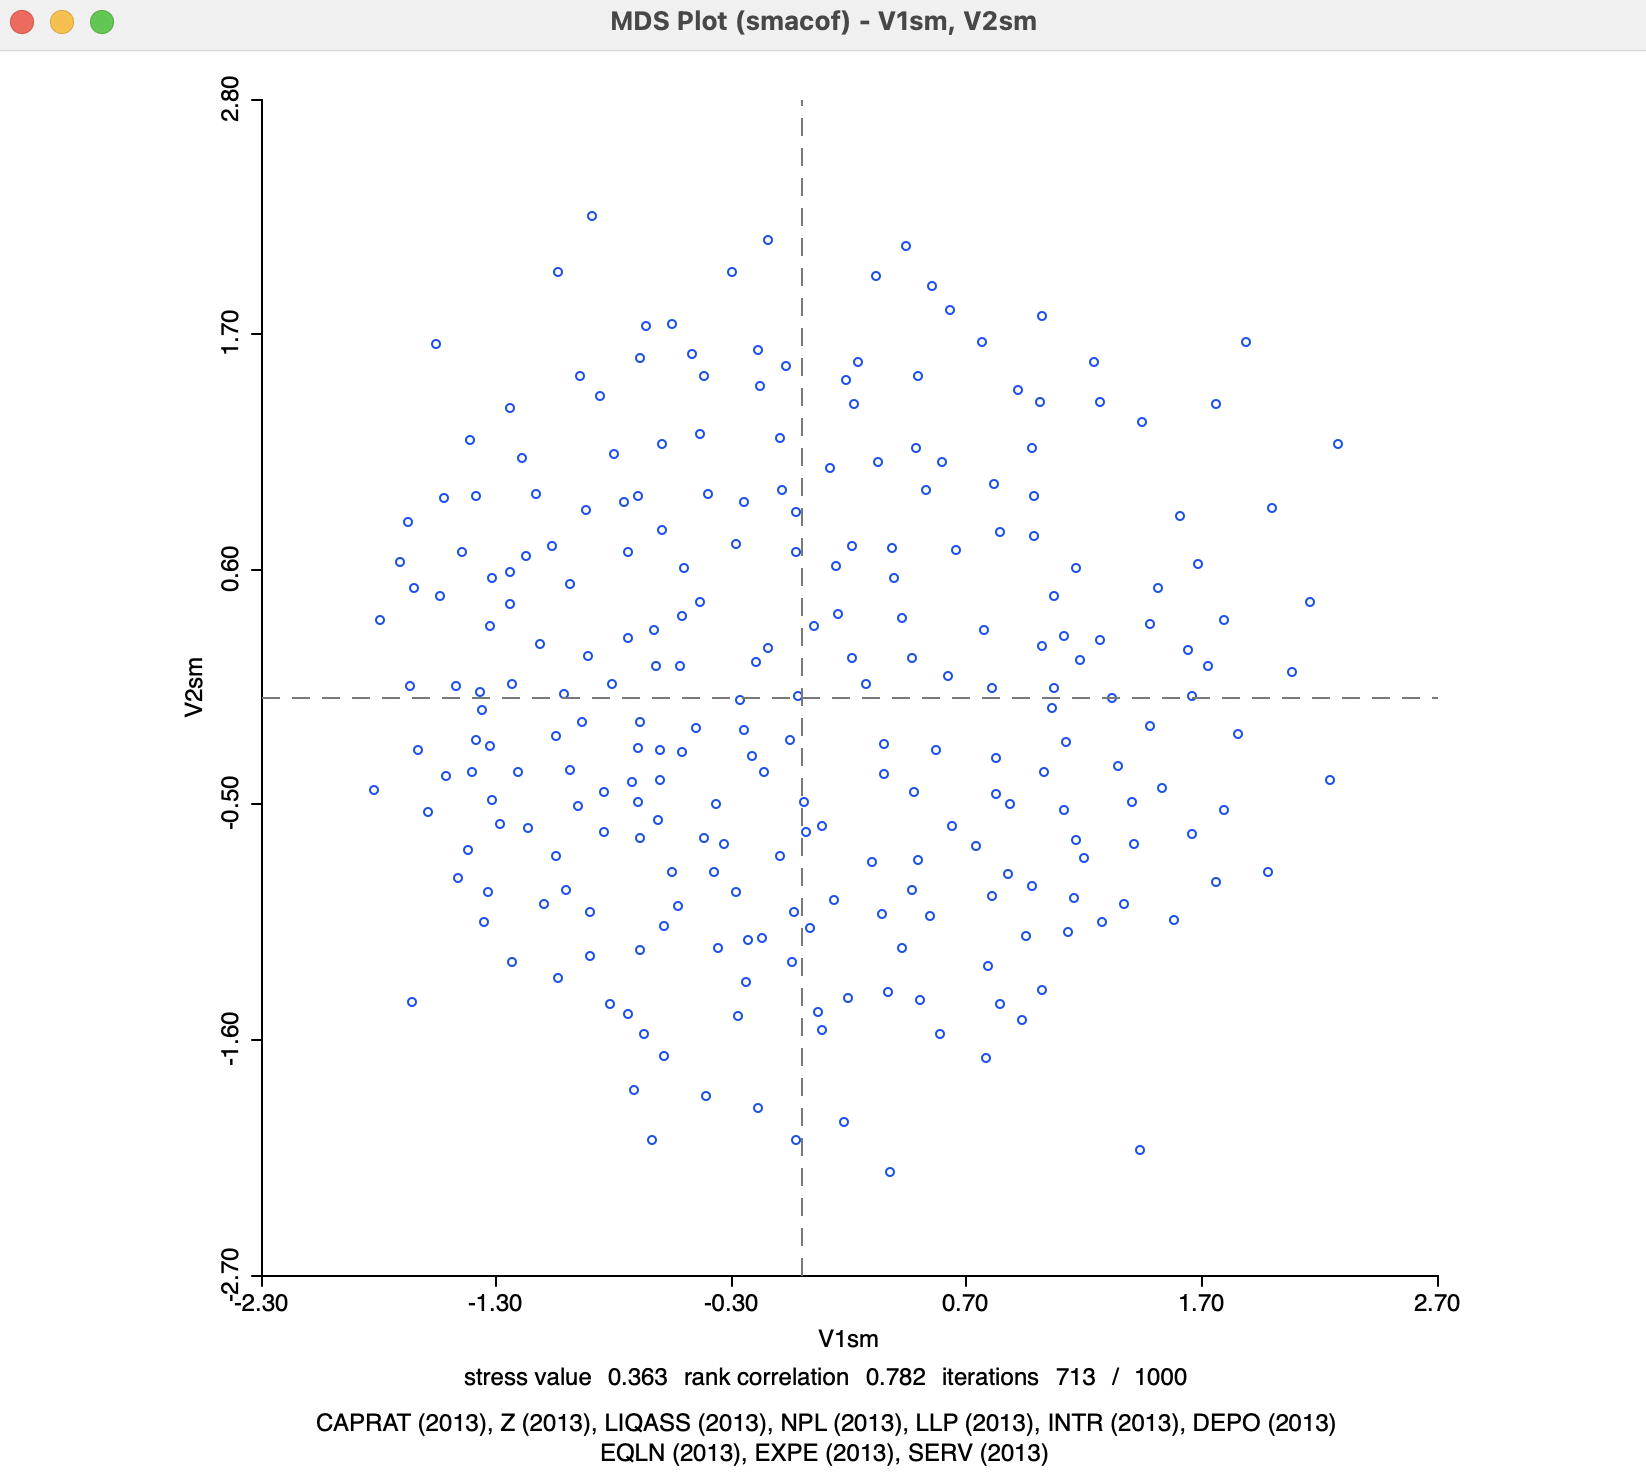 MDS Scatter Plot for SMACOF with Manhattan Distance